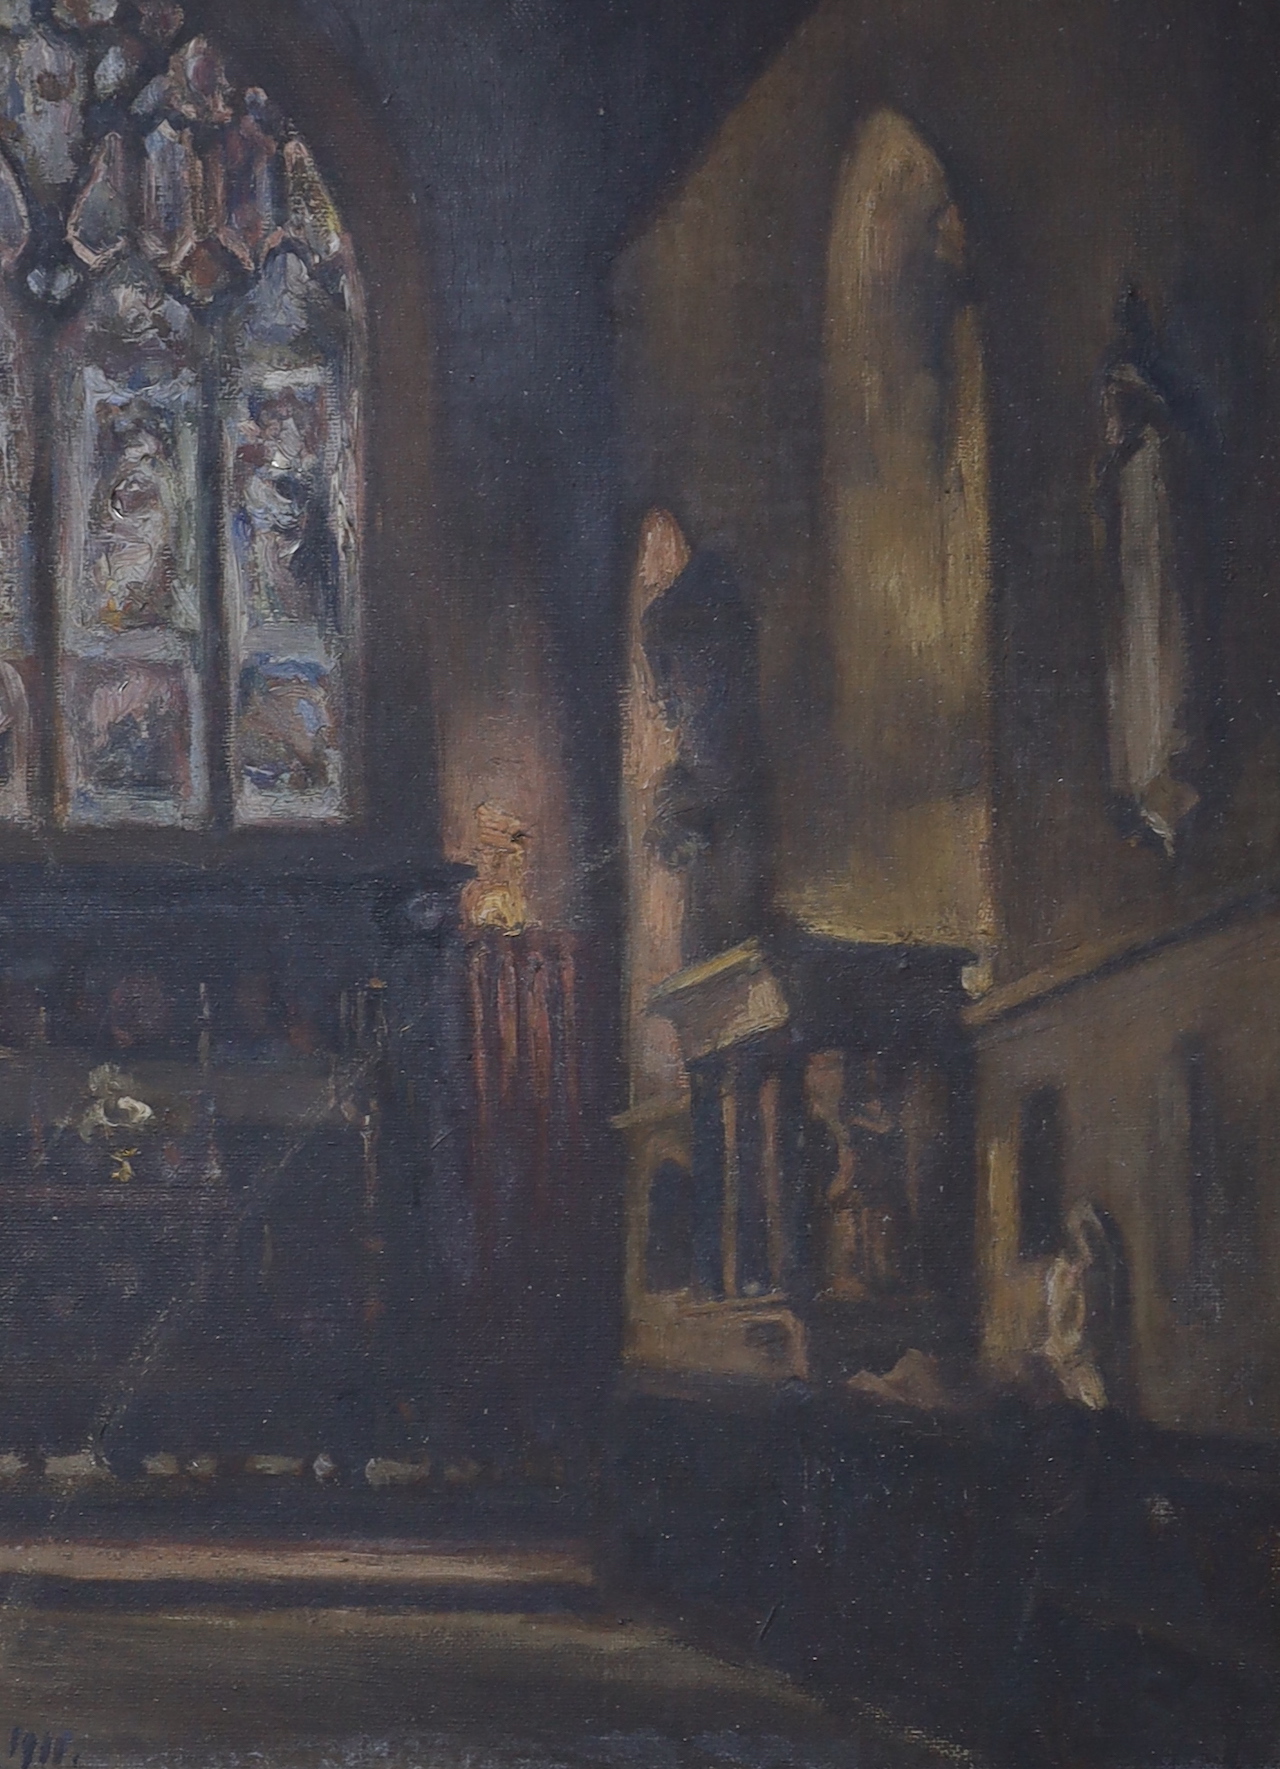 Manner of Vanessa Bell (1879-1961), oil on canvas, Church interior, bears monogram and date 1911, 34 x 25cm